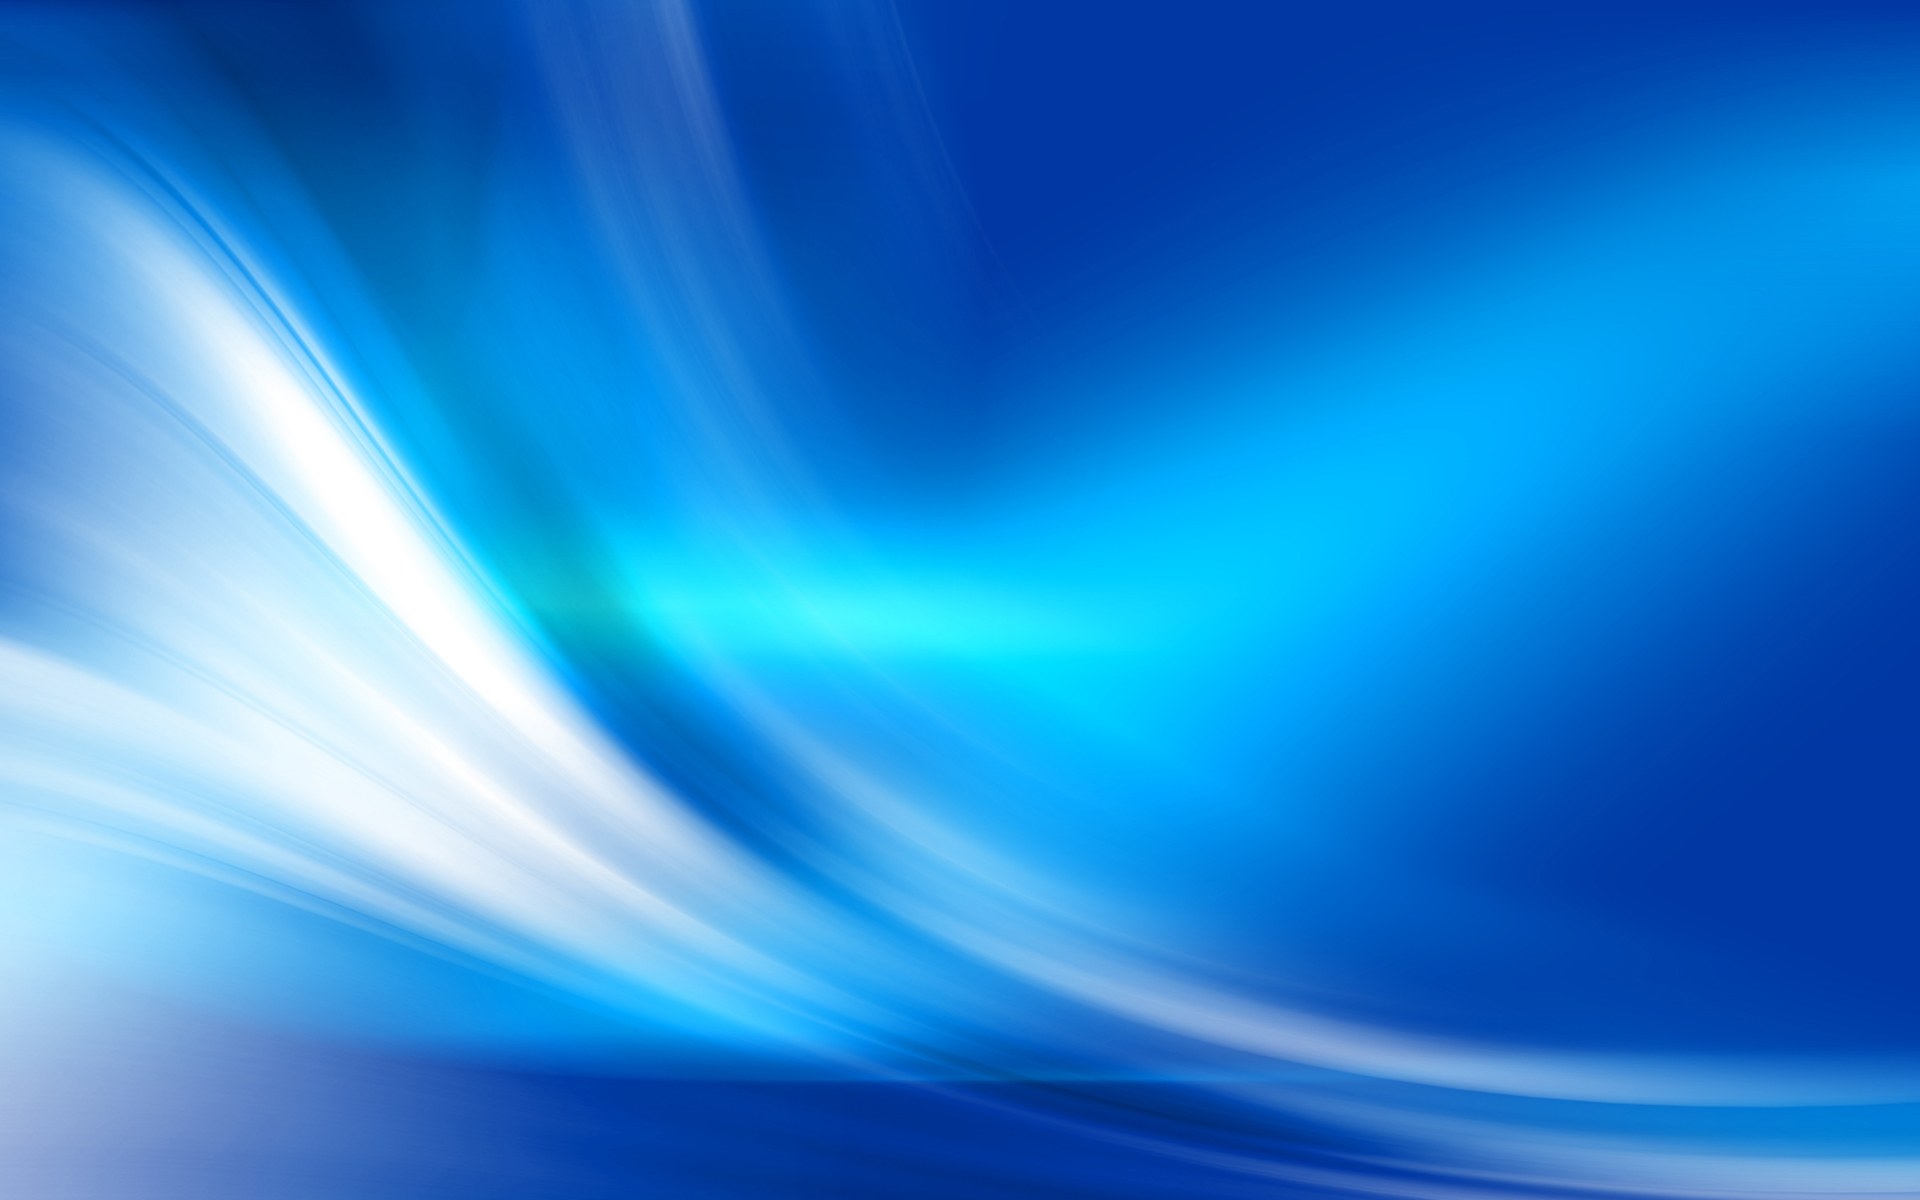 Blue Background iPhone HD Is High Definition Wallpaper You Can